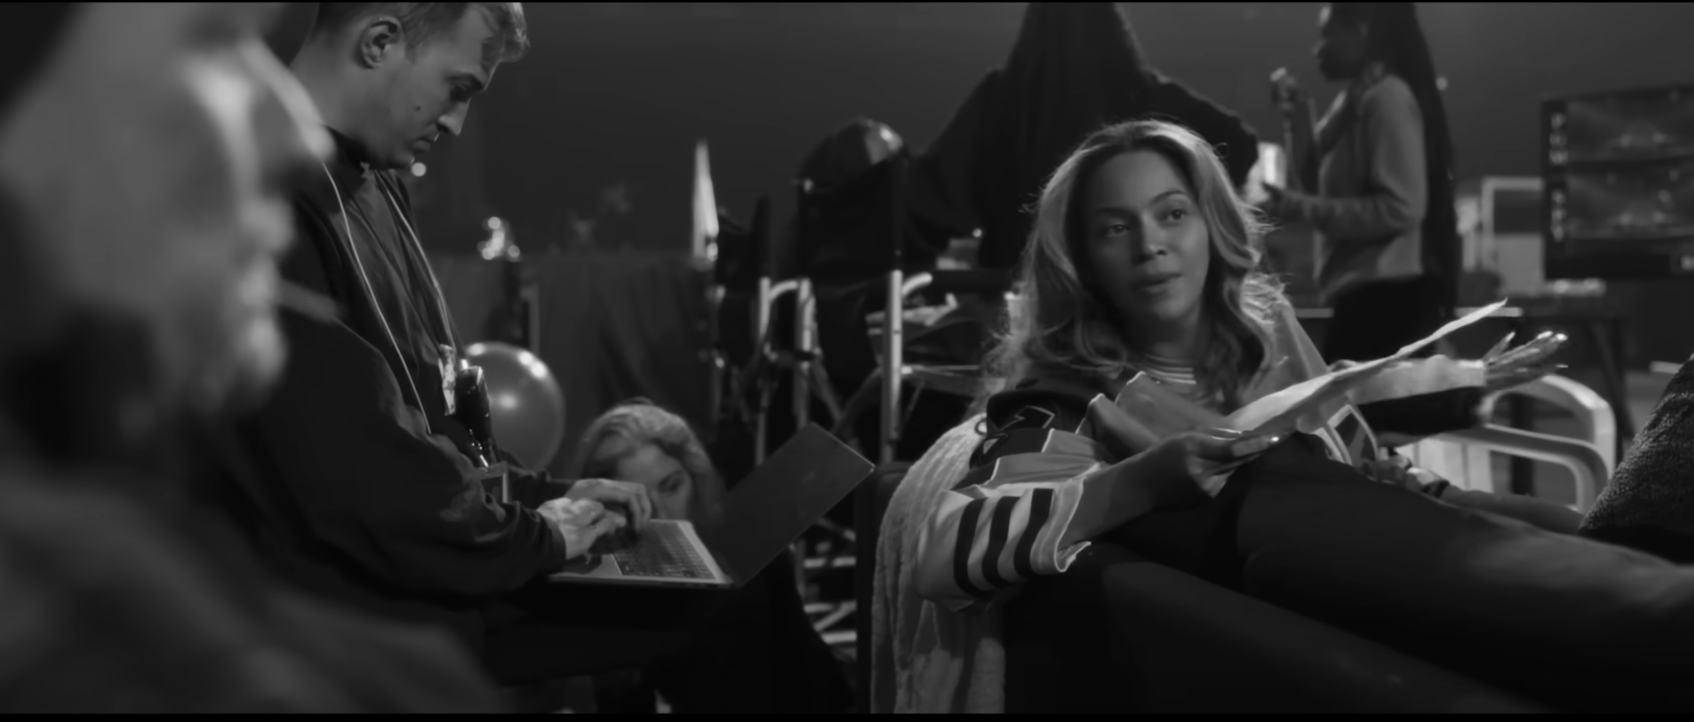 Beyoncé sitting and talking with others